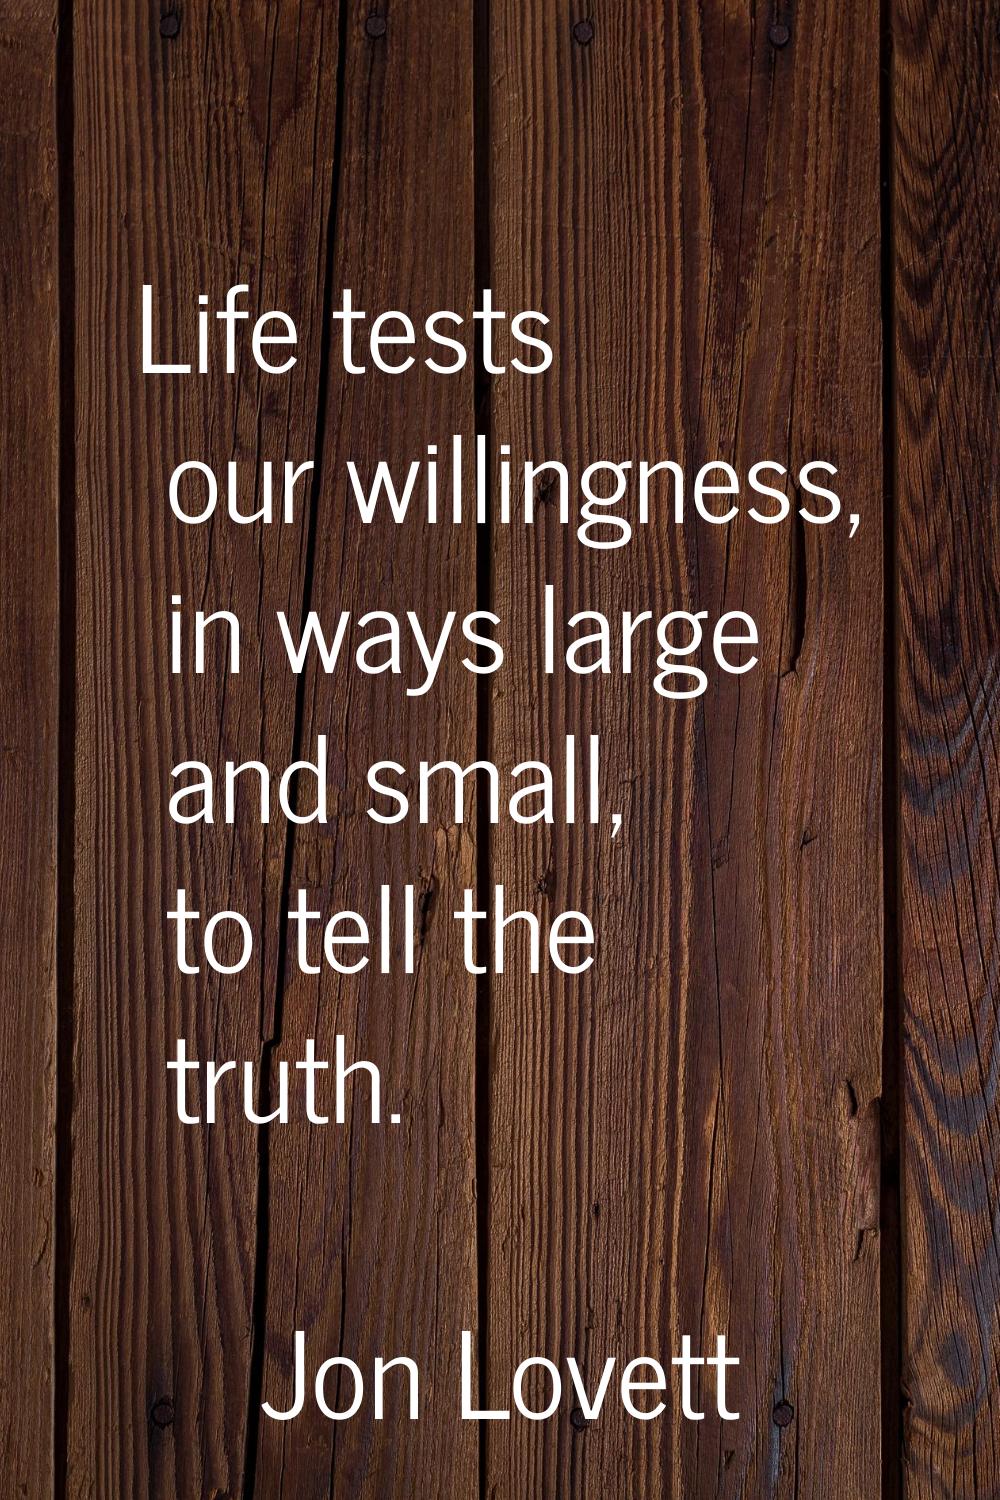 Life tests our willingness, in ways large and small, to tell the truth.